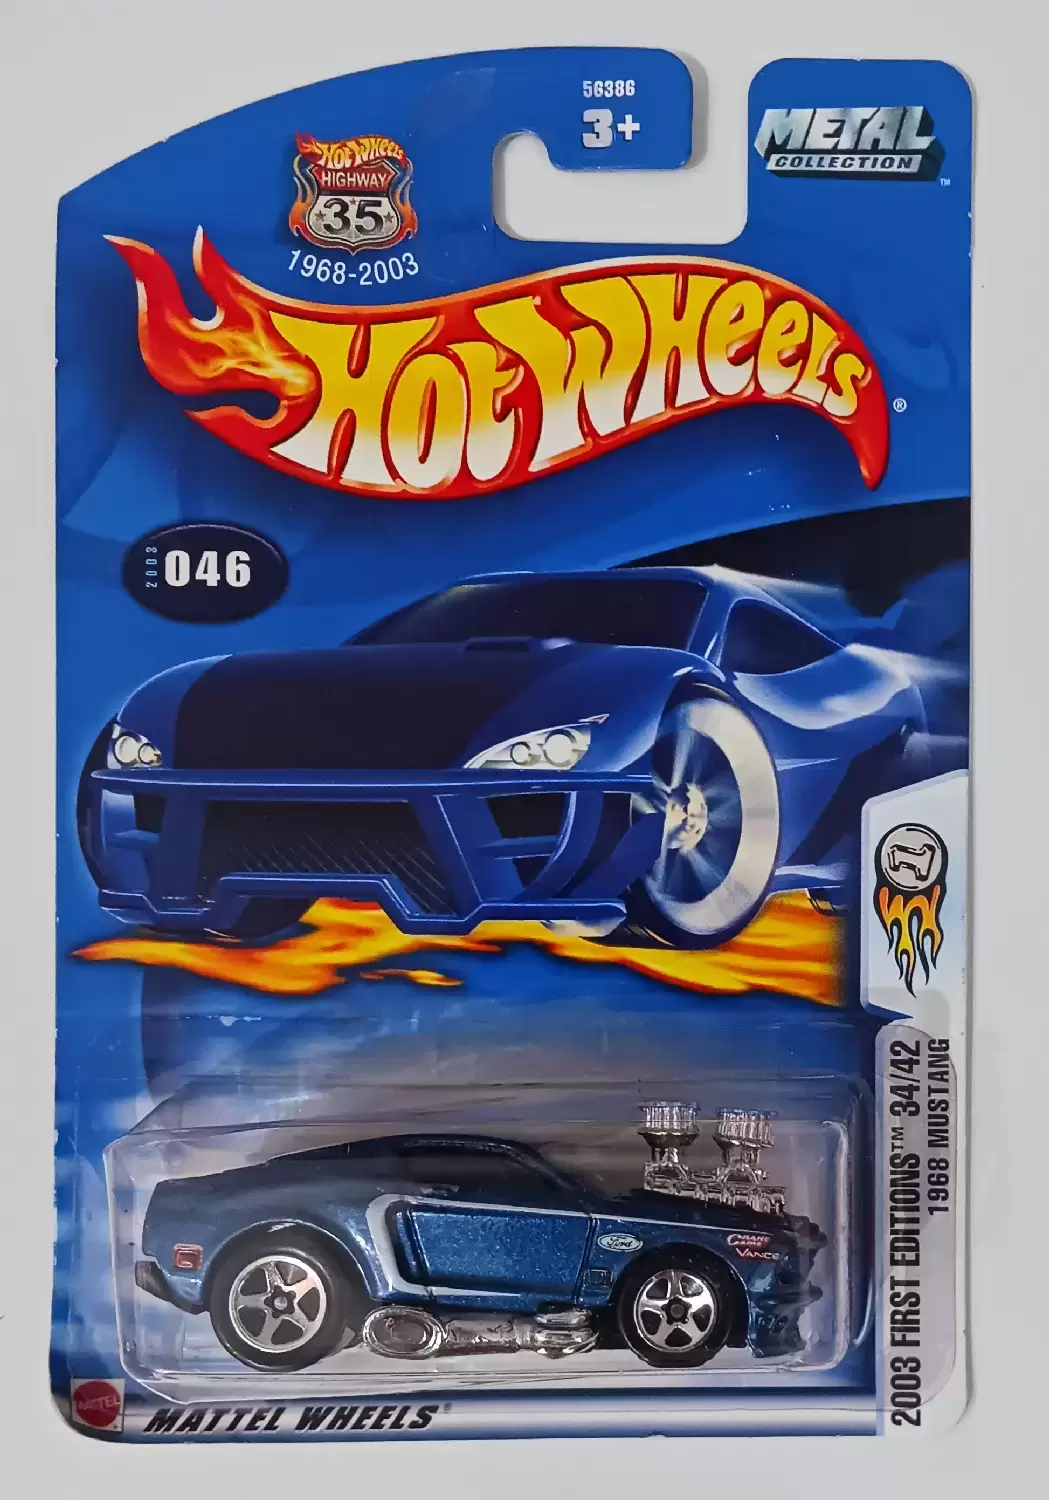 Mainline Hot Wheels - Hot Wheels Collector No. 046 First Editions 1968 Mustang